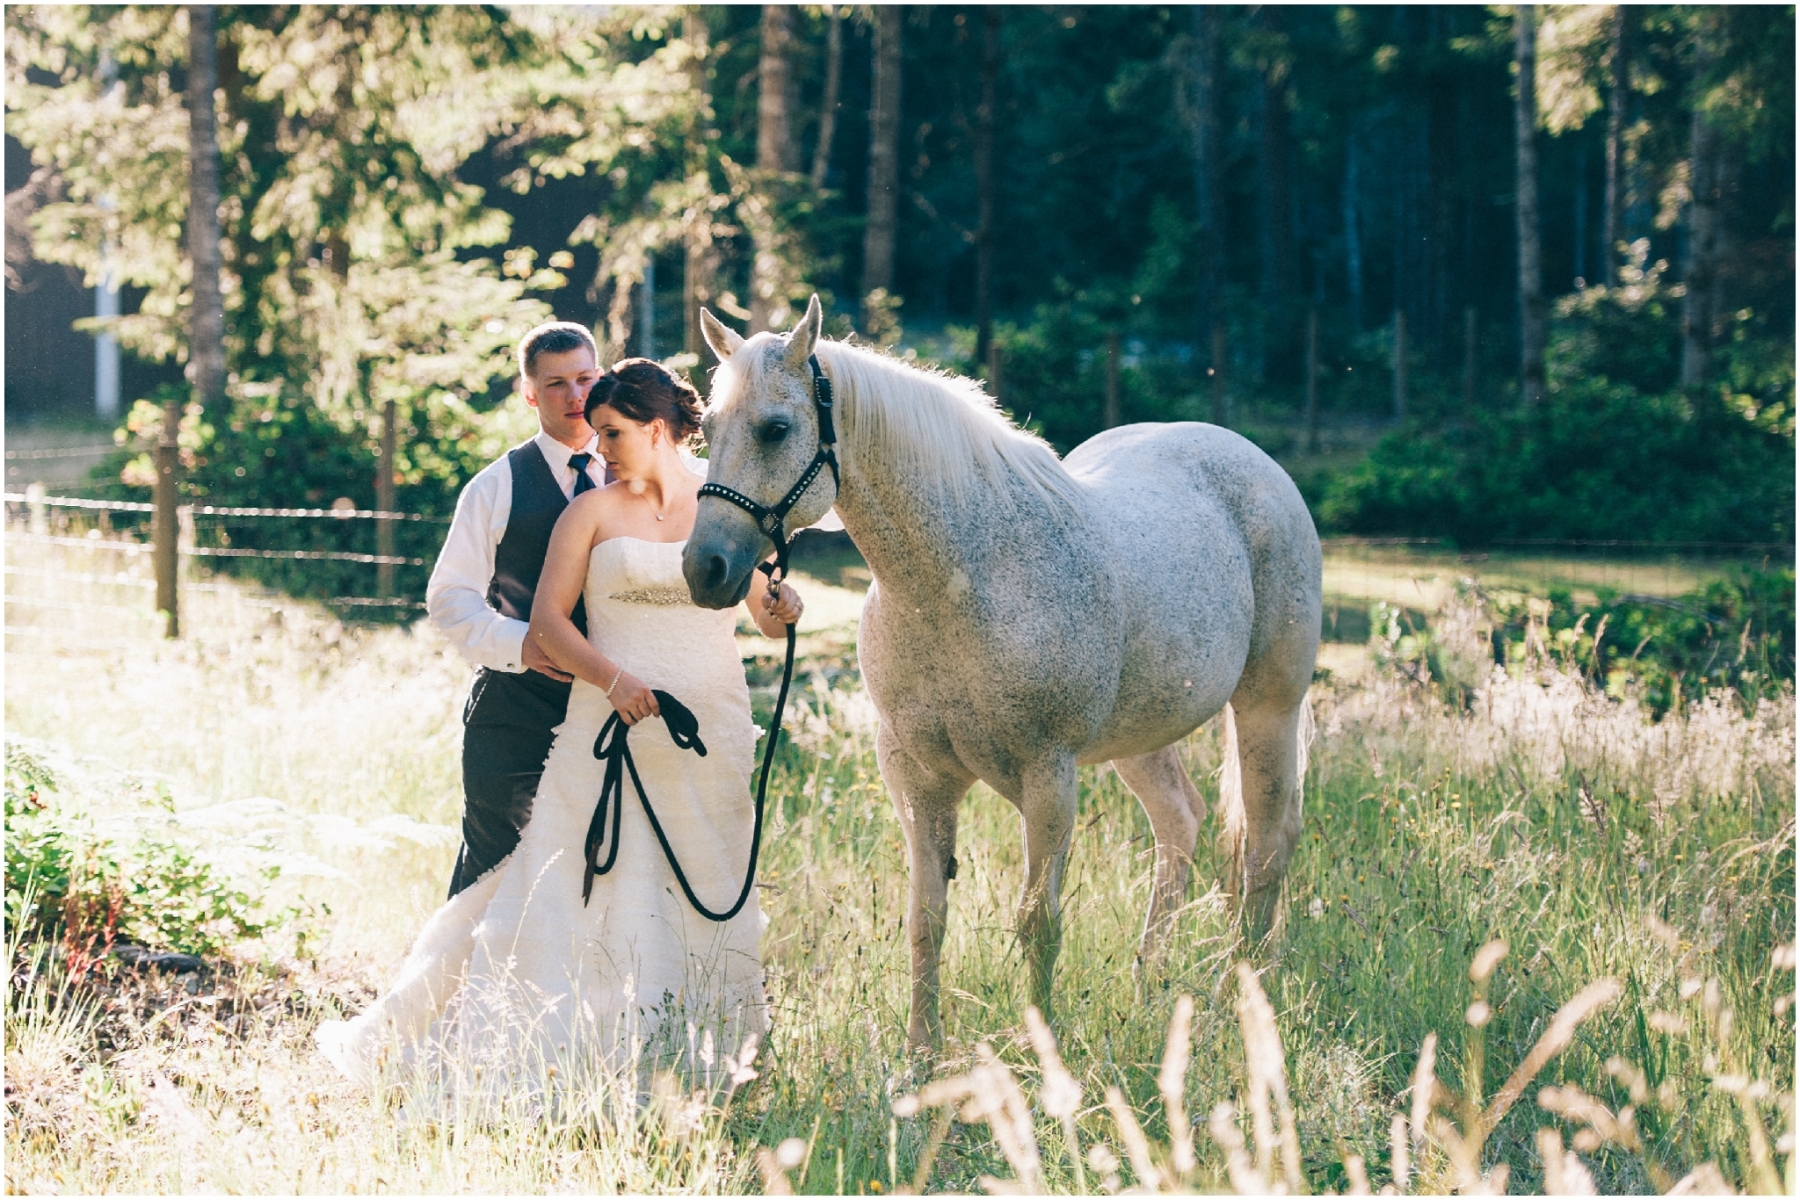 Bride and Groom Wedding Photo standing next to a horse by Ardita Kola Photography